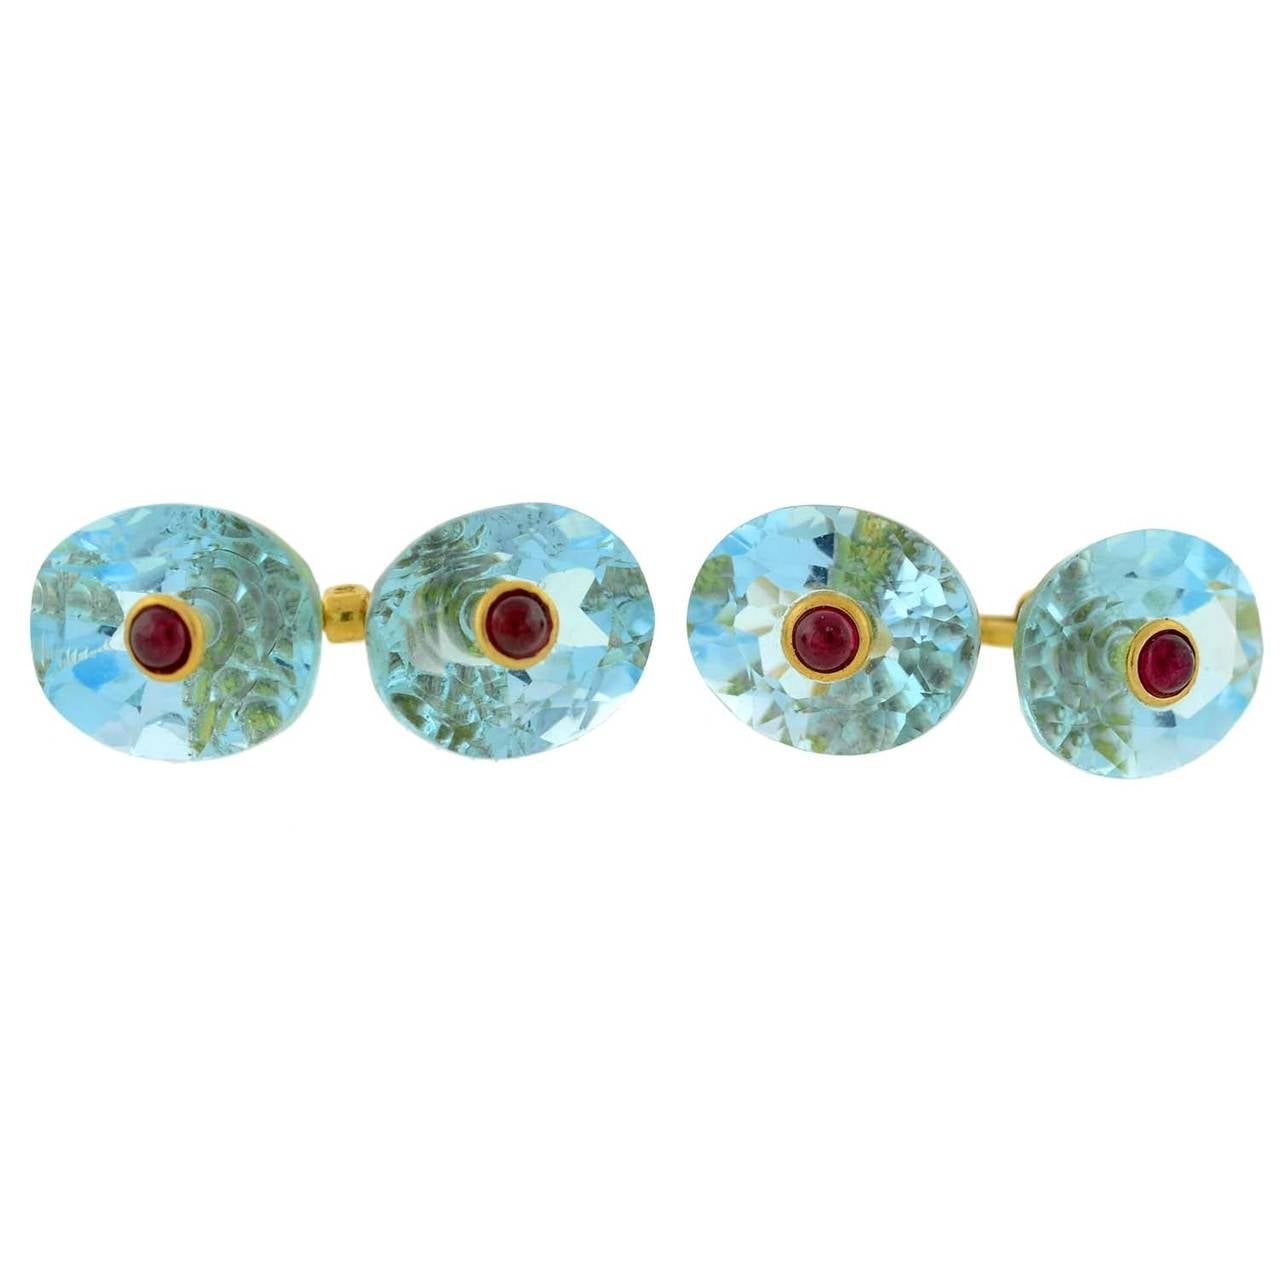 A very attractive and unusual cufflink set from the Retro (ca1940) era! Included in this 5-piece set is a pair of double-sided cufflinks and 3 matching shirt studs. Each double-sided cufflink is comprised of an oval-shaped blue topaz face with